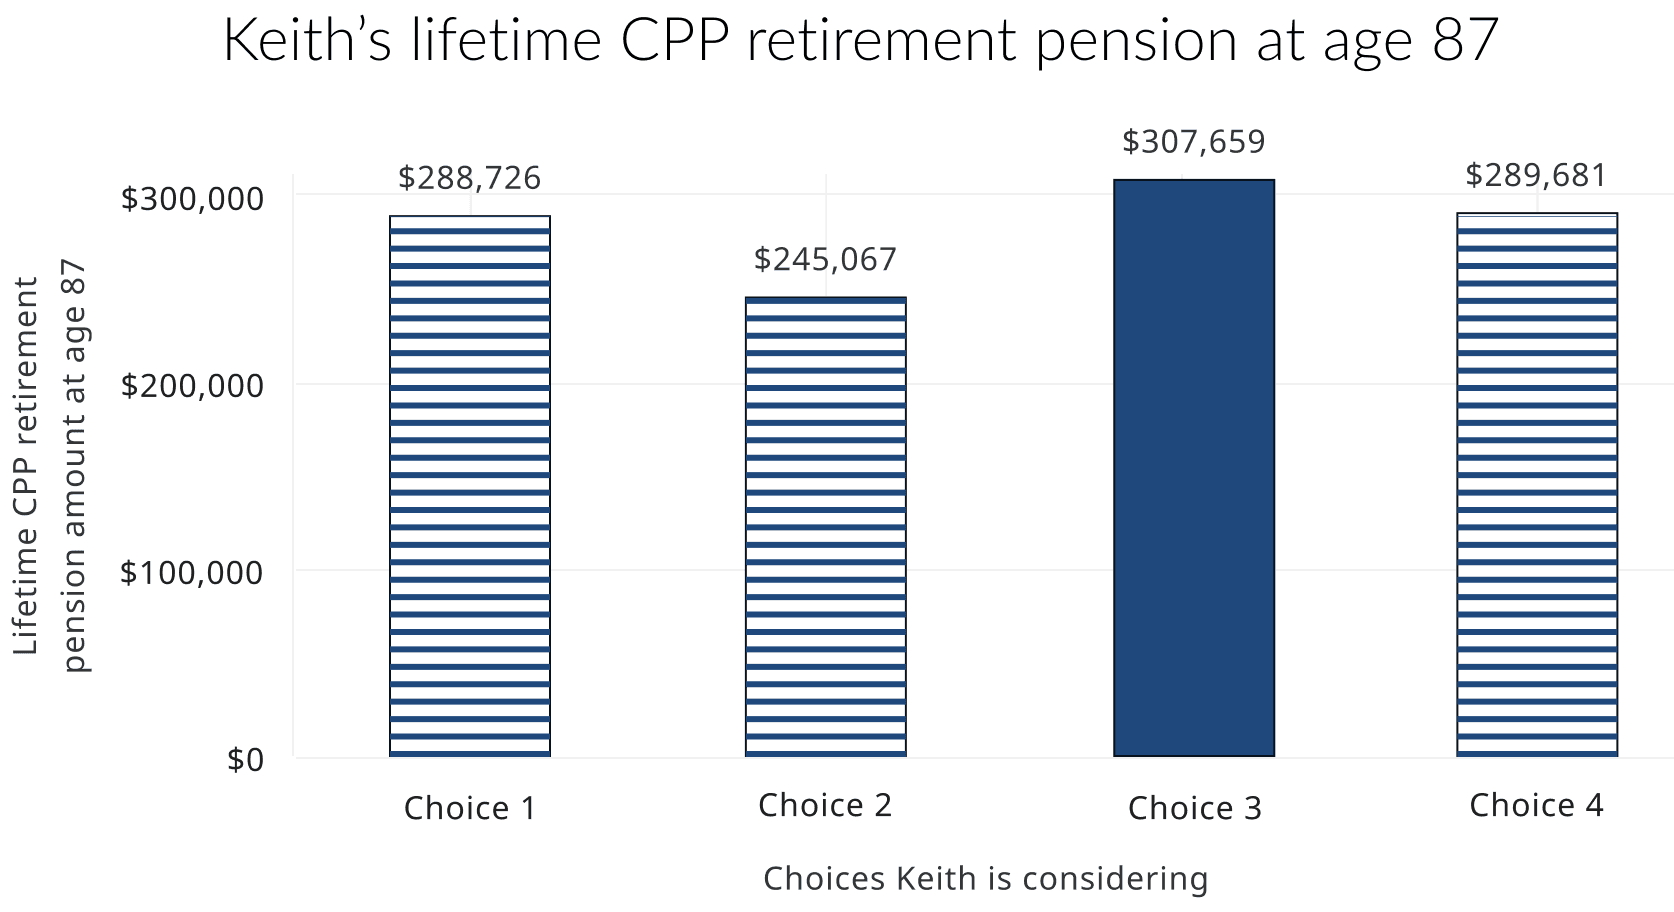 This chart shows the lifetime CPP retirement pension amount for 4 choices Keith is thinking about. It shows that by age 87, the choice of starting his CPP retirement pension at age 65 while working and contributing until 70 would give Keith the most retirement income.